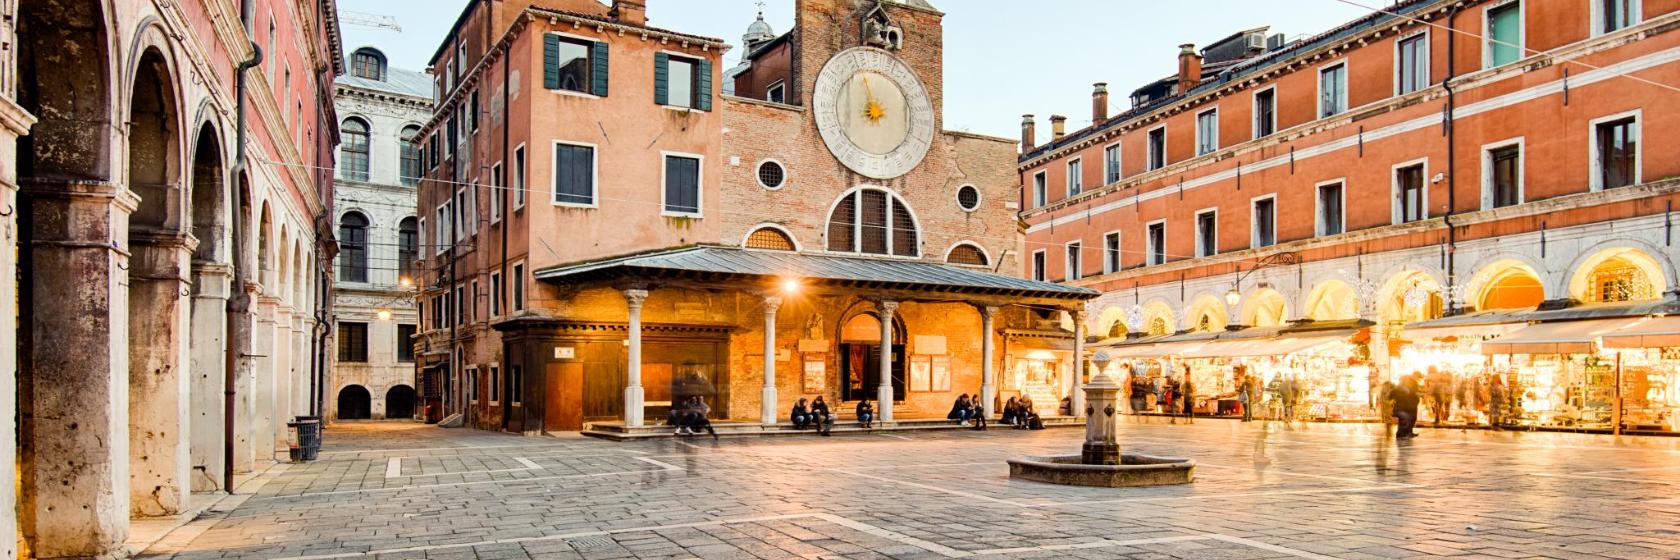 The 10 best hotels near San Polo in Venice, Italy